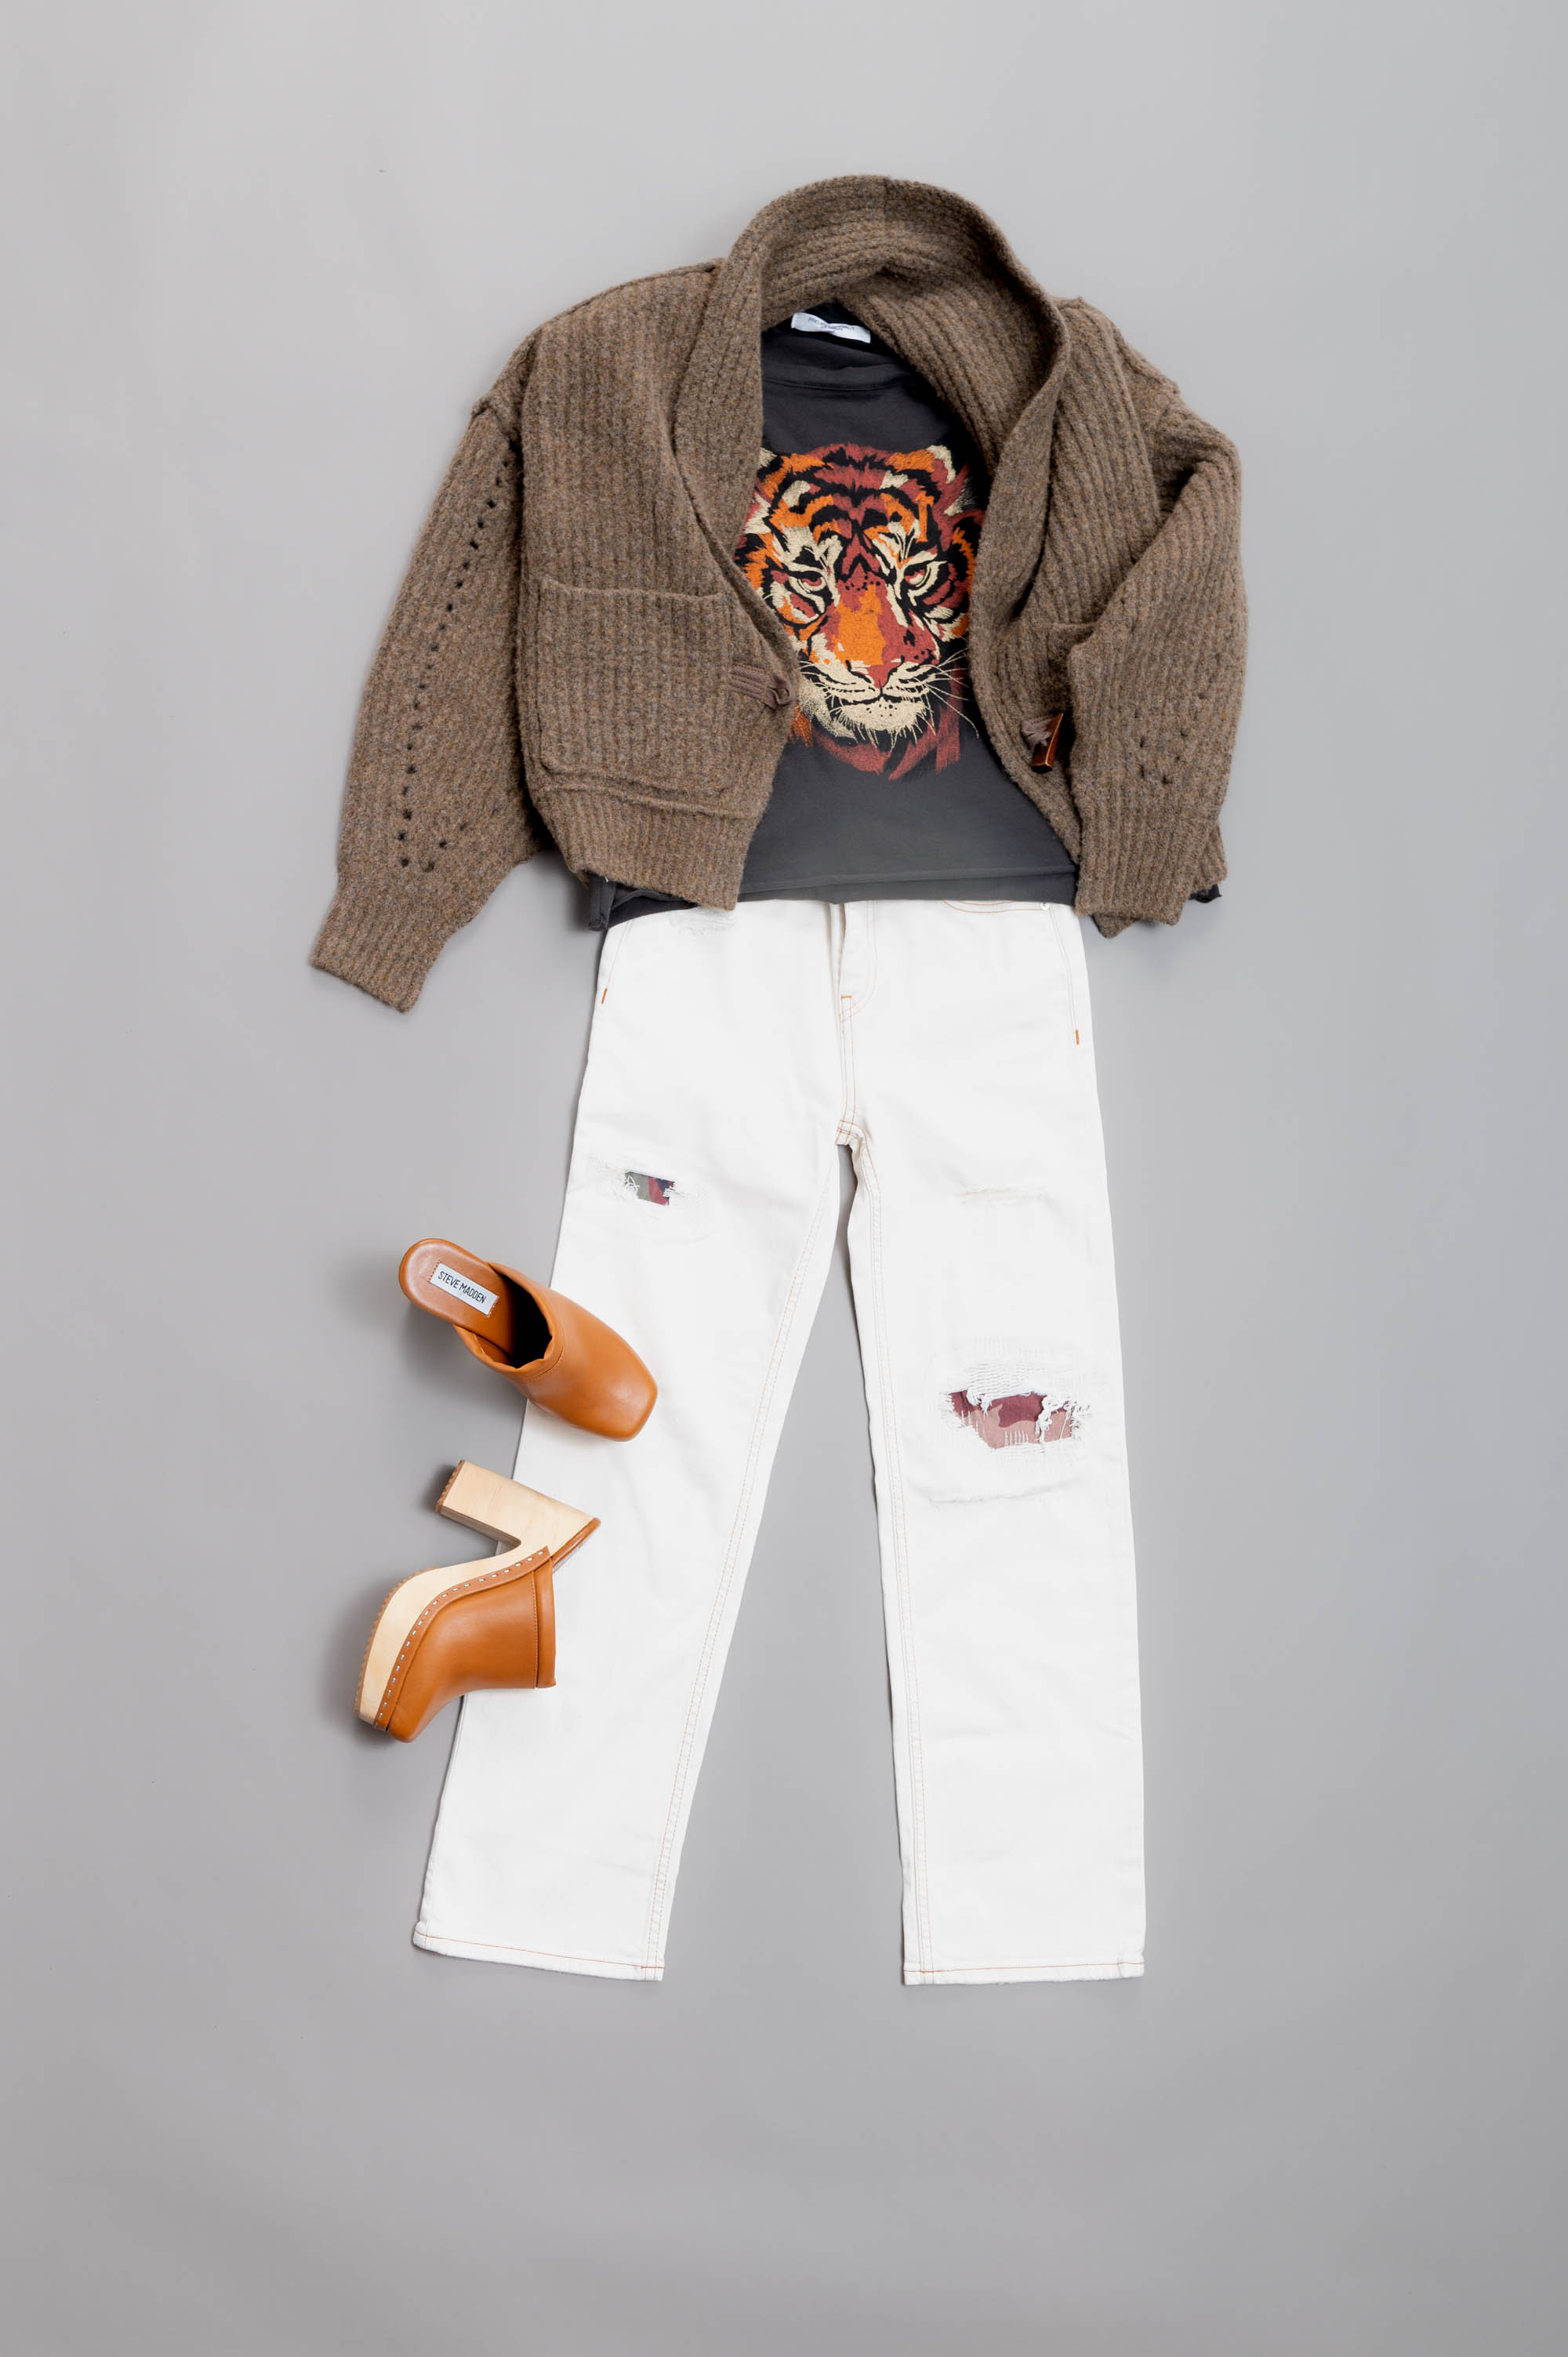 Hudson Remi High-Rise Straight Ankle Jean, $245; Project Social T Los Angeles, Shoulder Pad Muscle Tank in Washed Black, $6; Free People Pinecone Sweater, $178; Alvara Cognac Leather Clog by Steve Mad